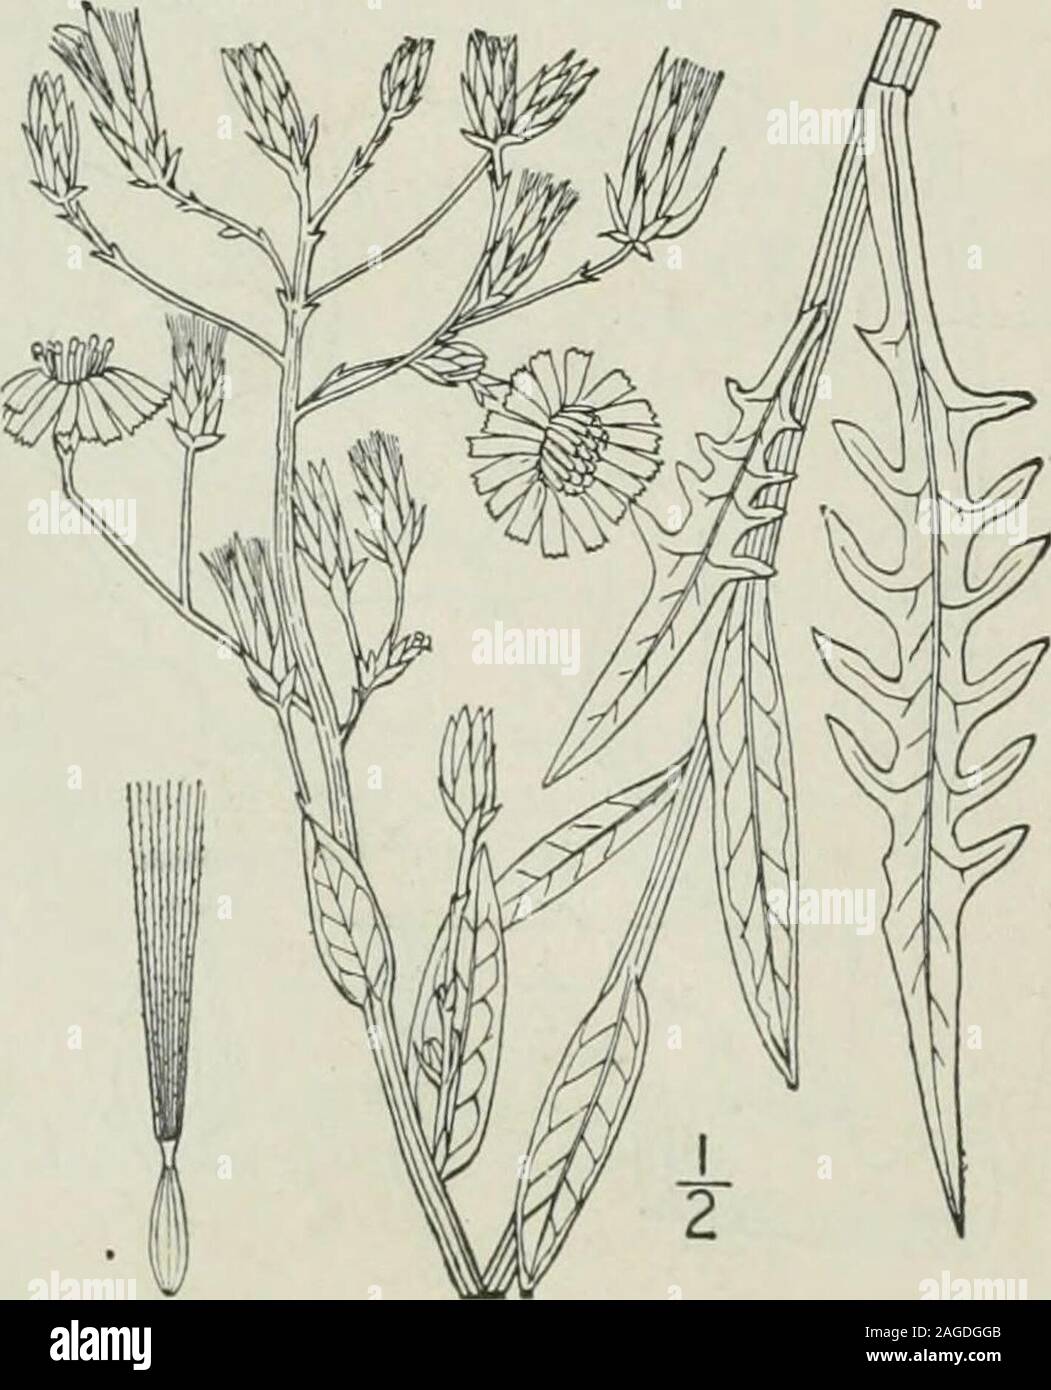 . An illustrated flora of the northern United States, Canada and the British possessions : from Newfoundland to the parallel of the southern boundary of Virginia and from the Atlantic Ocean westward to the 102nd meridian. form beaks,may be a hybrid with L. spicata. 7. Lactuca sagittifolia Ell. Arrow-leavedLettuce. Fig. 4074. L. sagittifolia Ell. Bot. S. C. & Ga. 2: 253. 1821-24.Lactuca integrifolia Bigel. Fl. Bost. Ed. 2, 287. 1824. Not Nutt. 1818.L. elongata var. integ. T. & G. Fl. N. A. 2: 496. 1843. Biennial; stem glabrous throughout, or hirsutebelow, leafy nearly up to the usually panicula Stock Photo